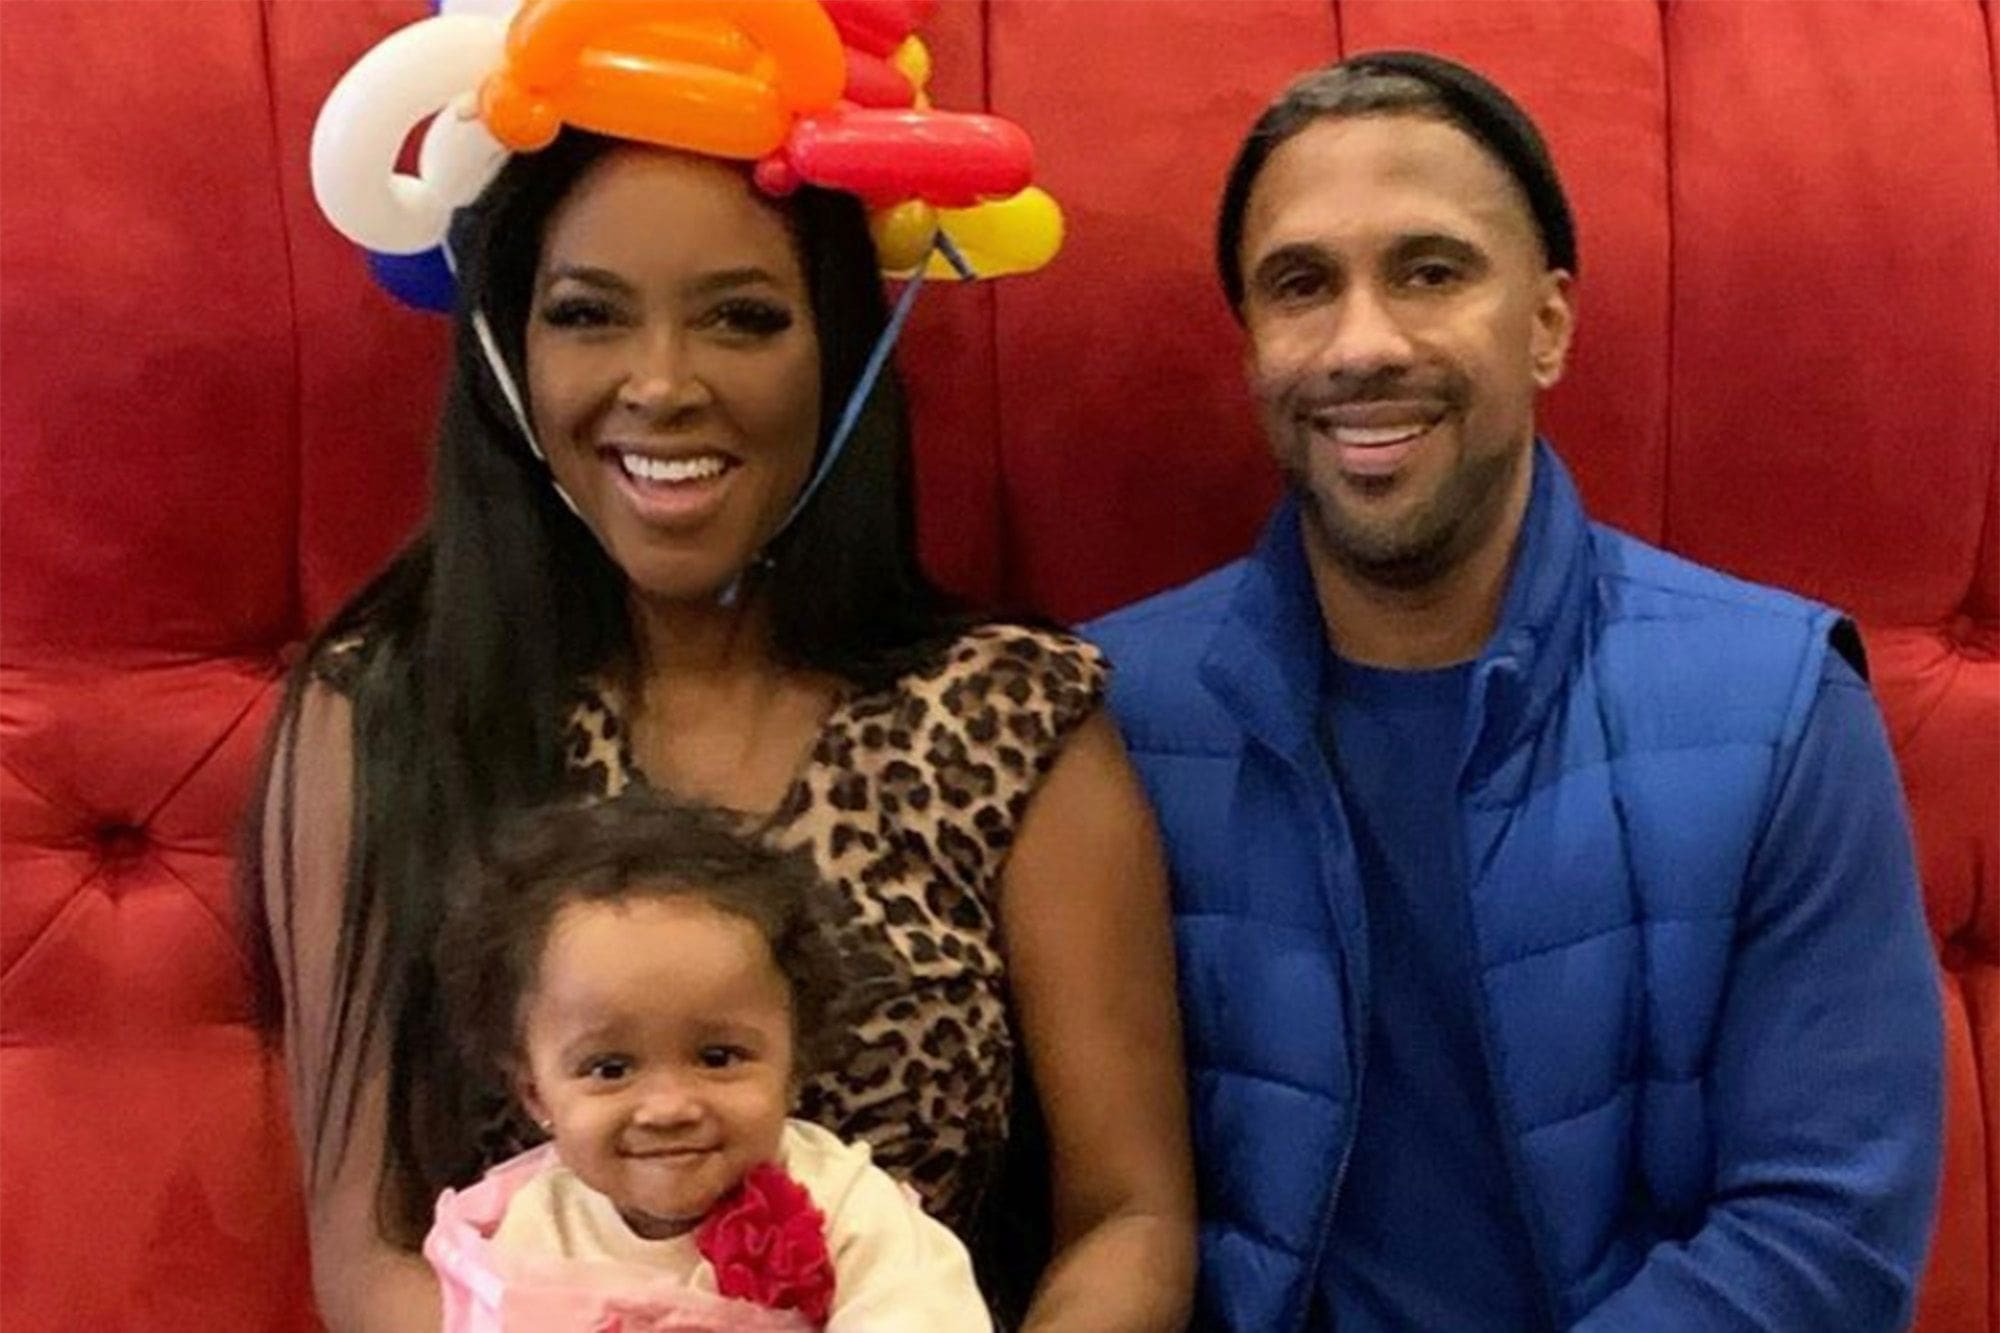 Kenya Moore Posts The Sweetest Video Featuring Brooklyn Daly Having The Best Time With Her Dad